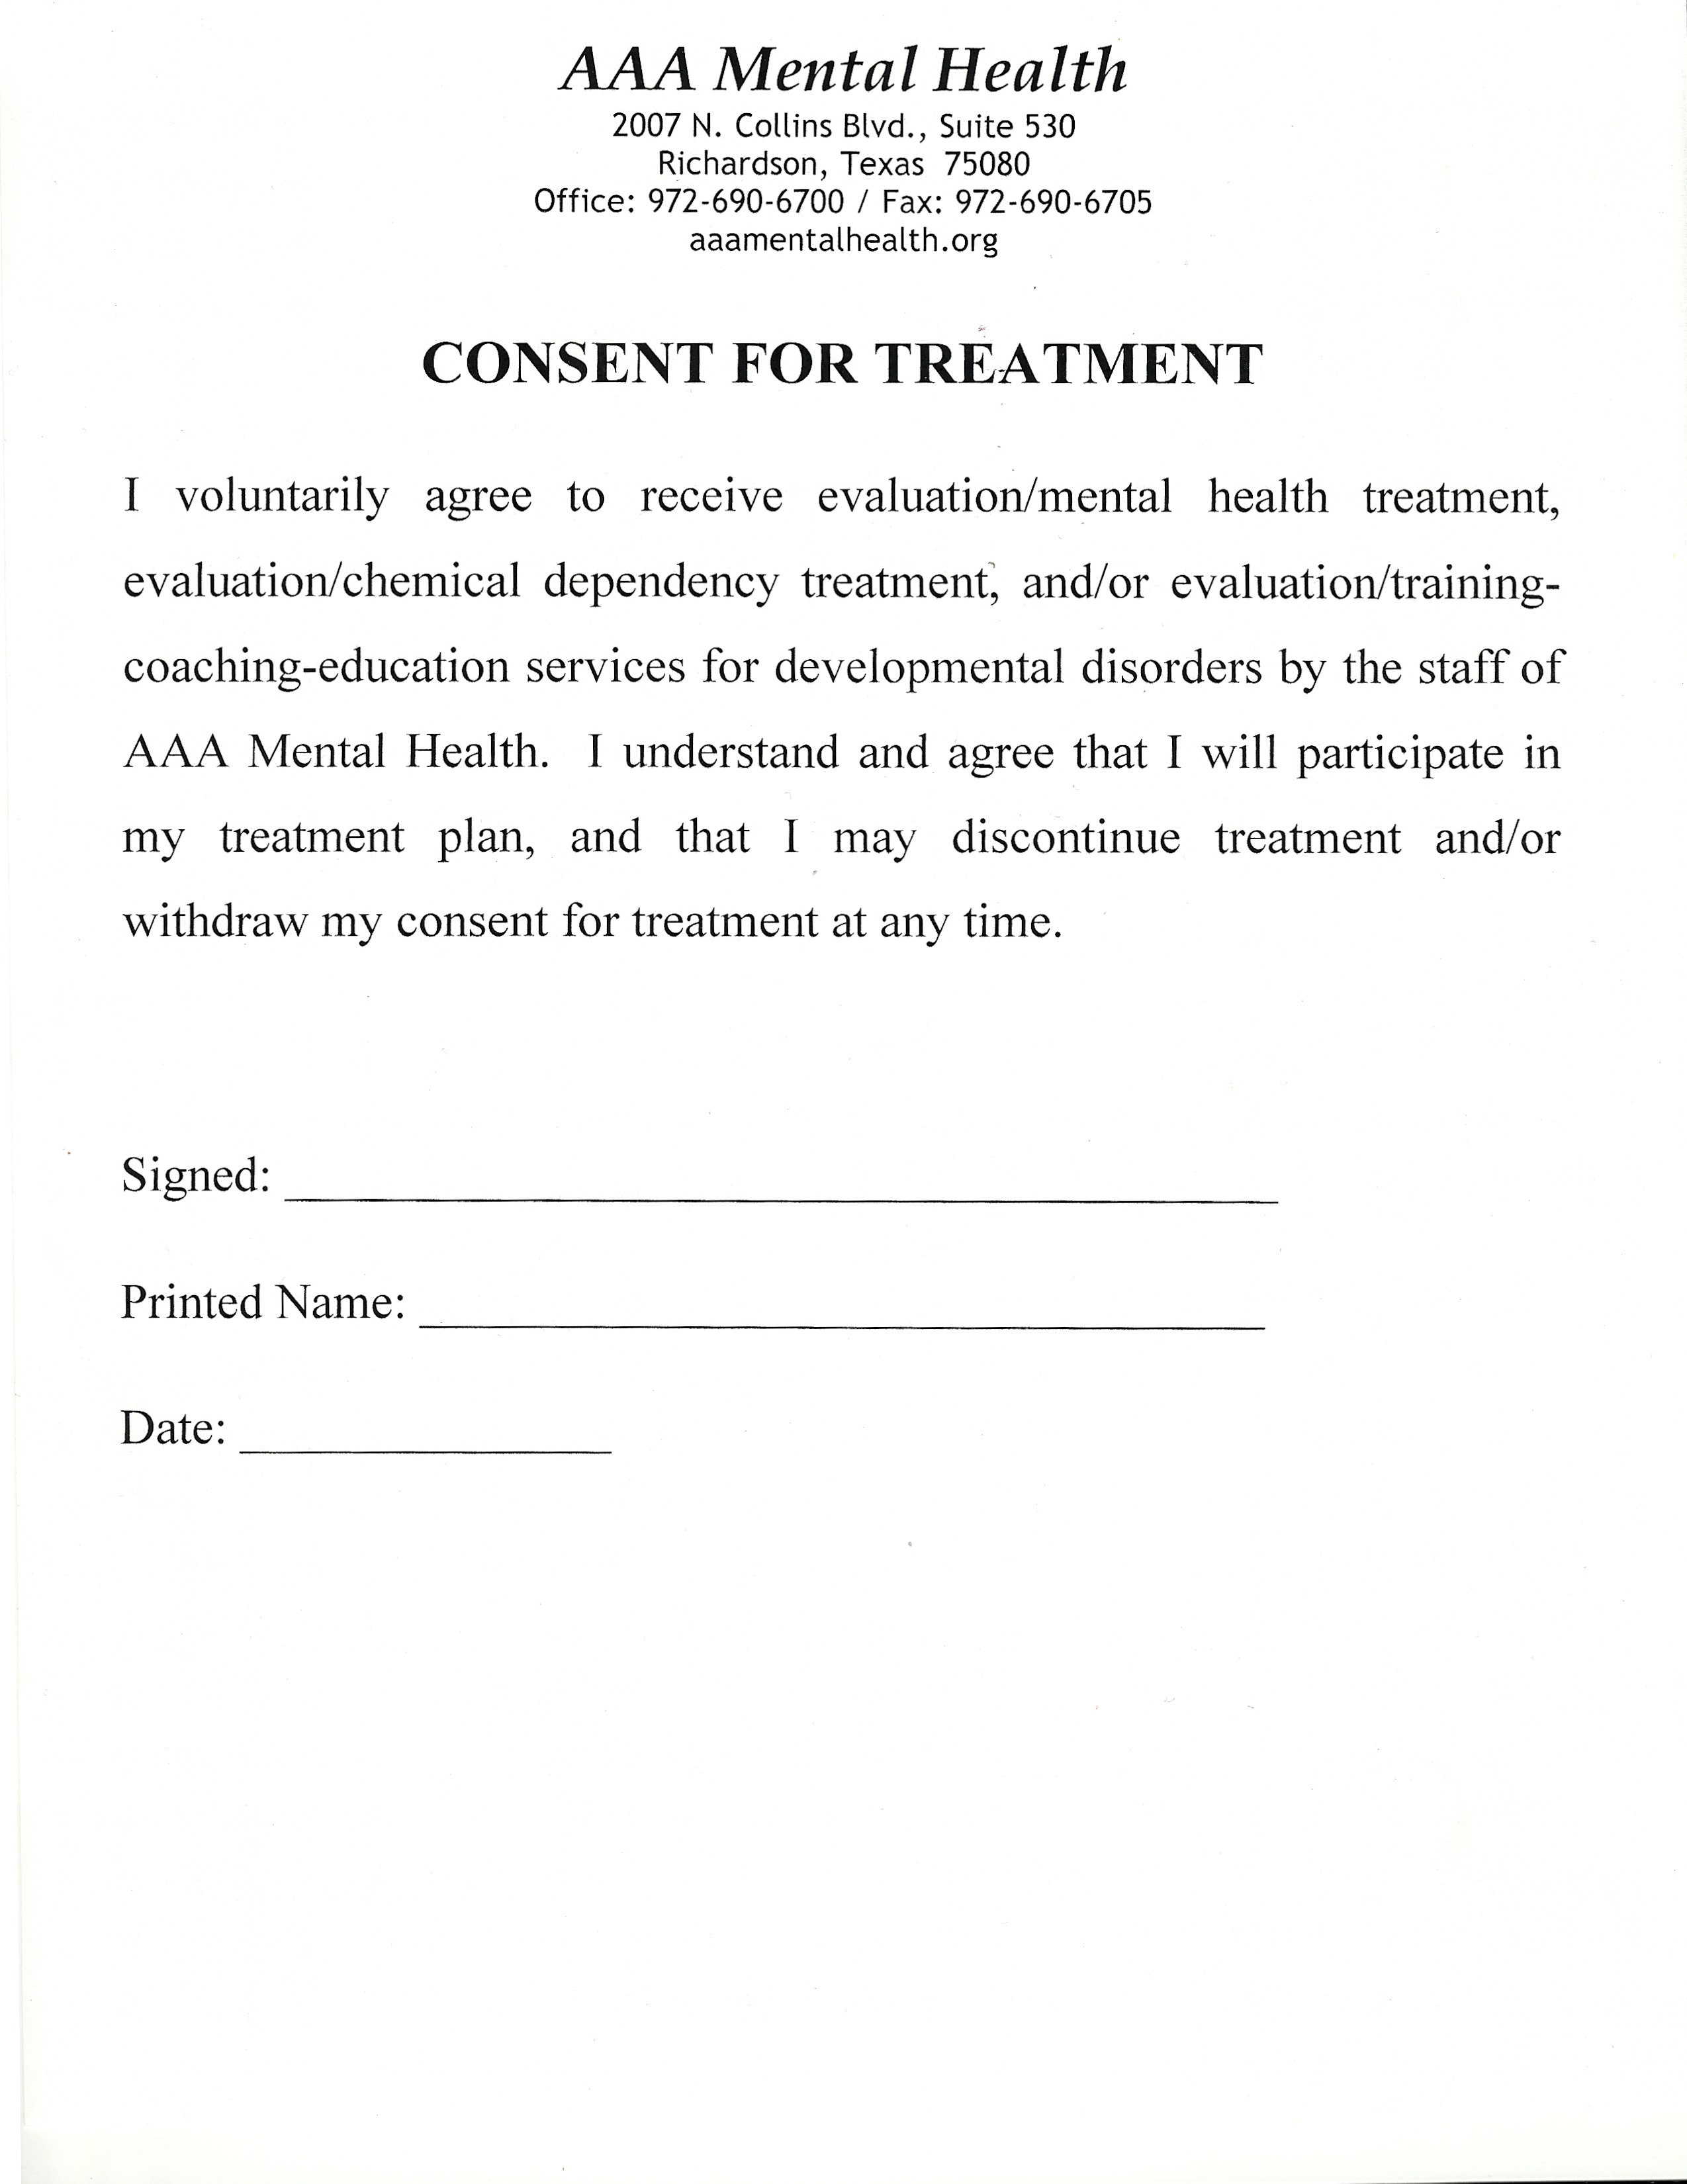 consent-to-treat-form-for-adults-printable-consent-form